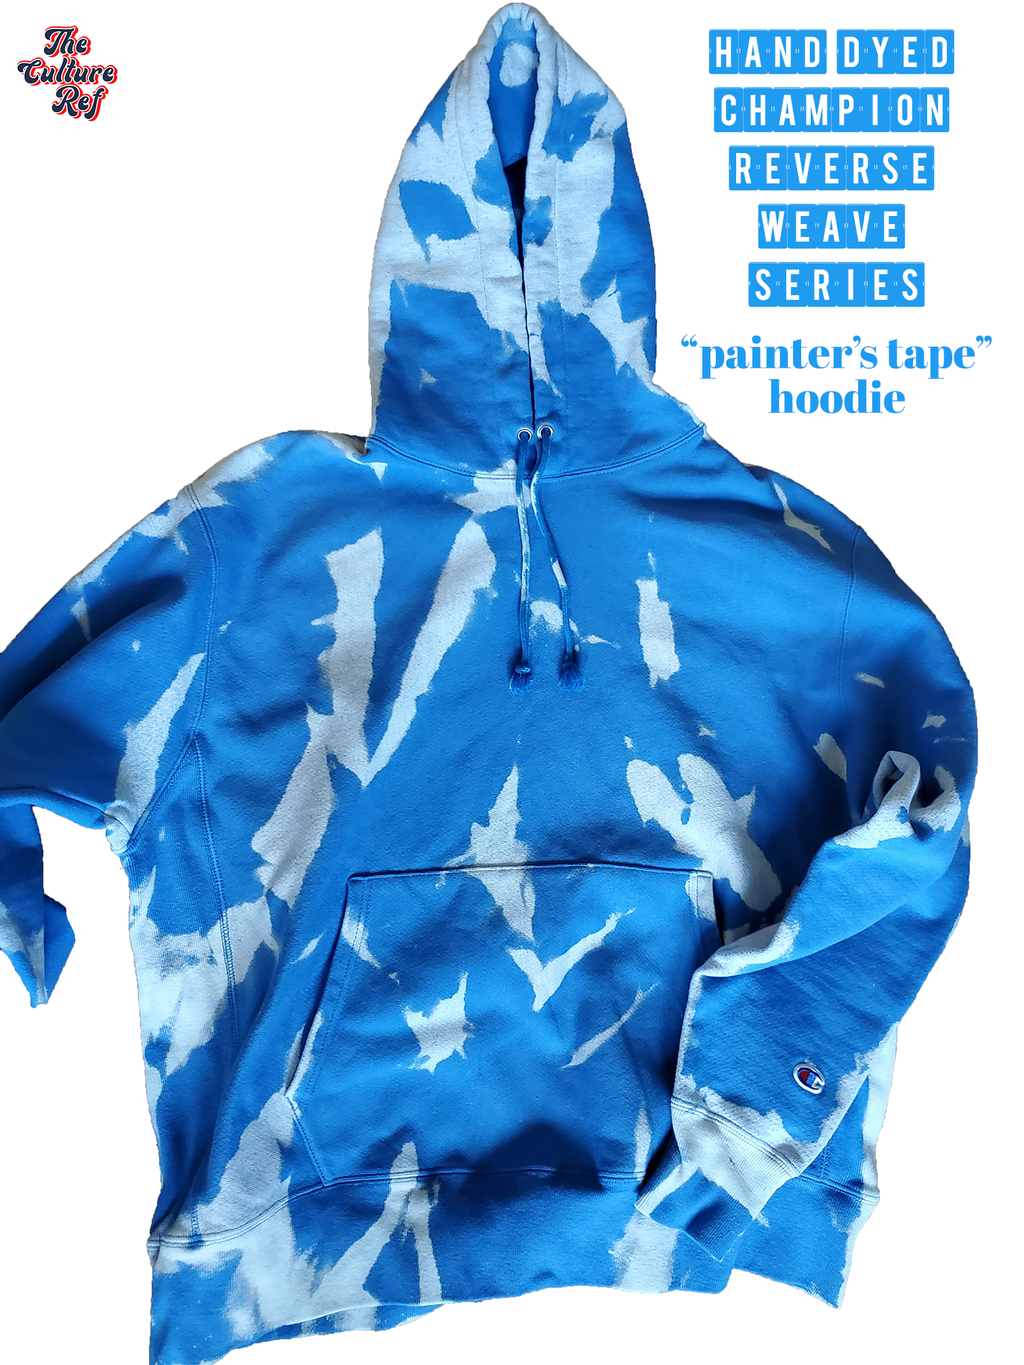 Hand Dyed Hoodie - Champion Reverse Weave | The Culture Ref T